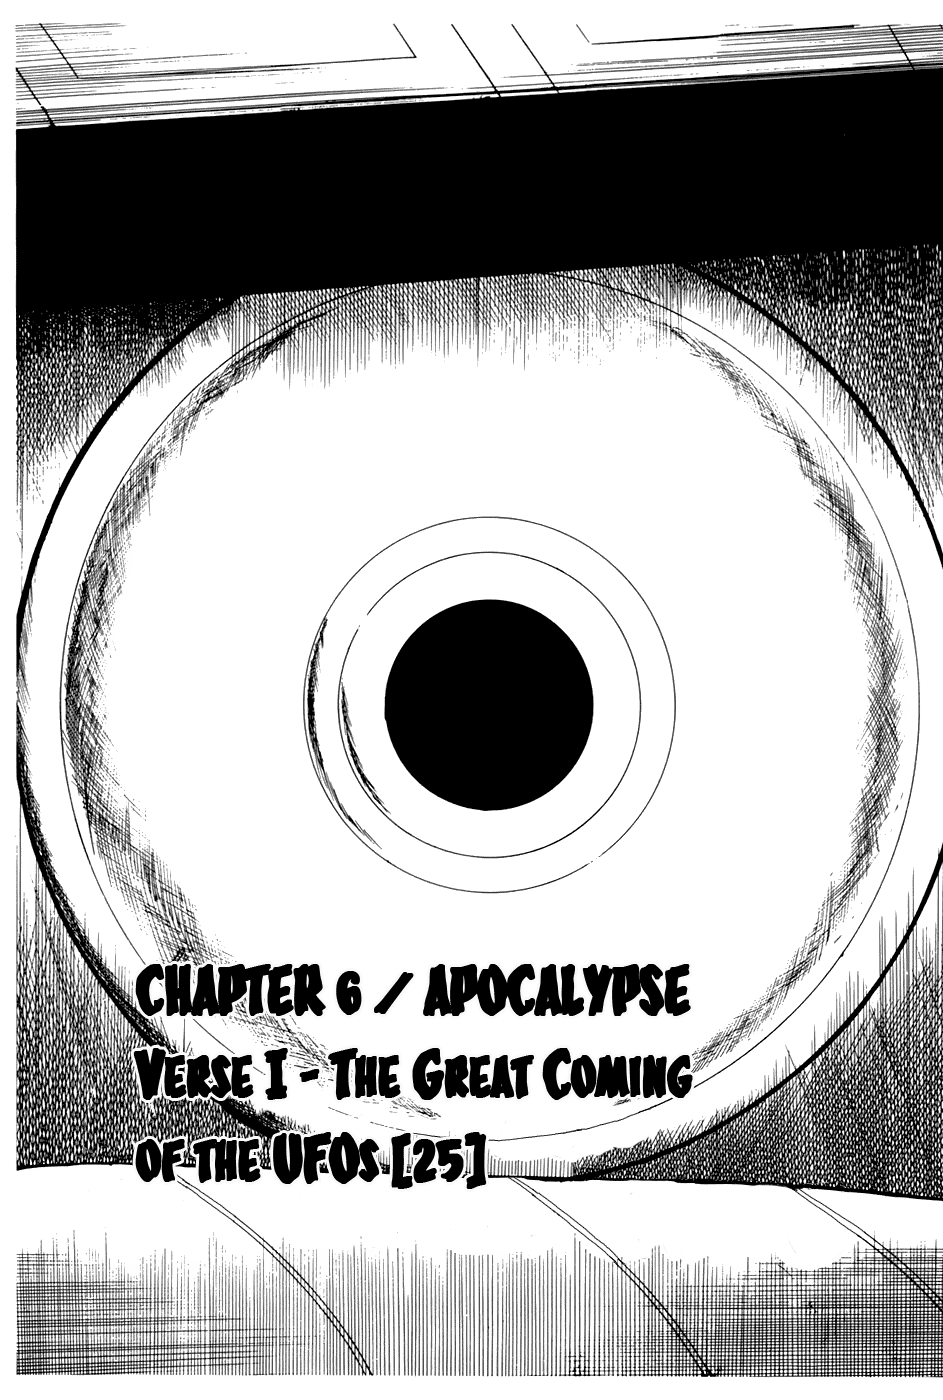 Fourteen Vol. 9 Ch. 177 Apocalypse Verse I The Great Coming of the UFOs (25)